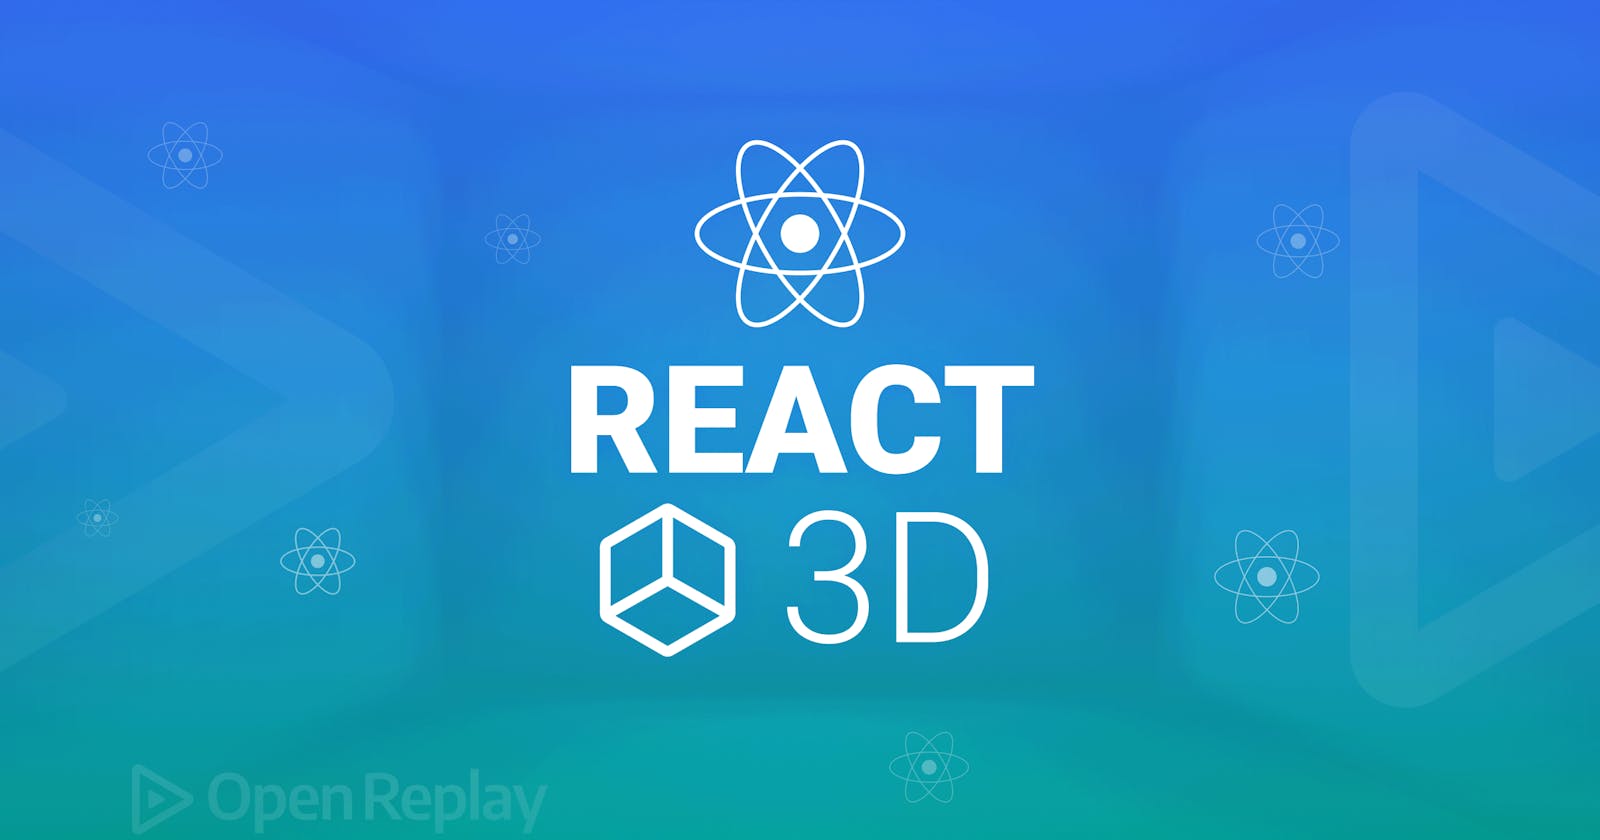 Implementing 3D graphics in React